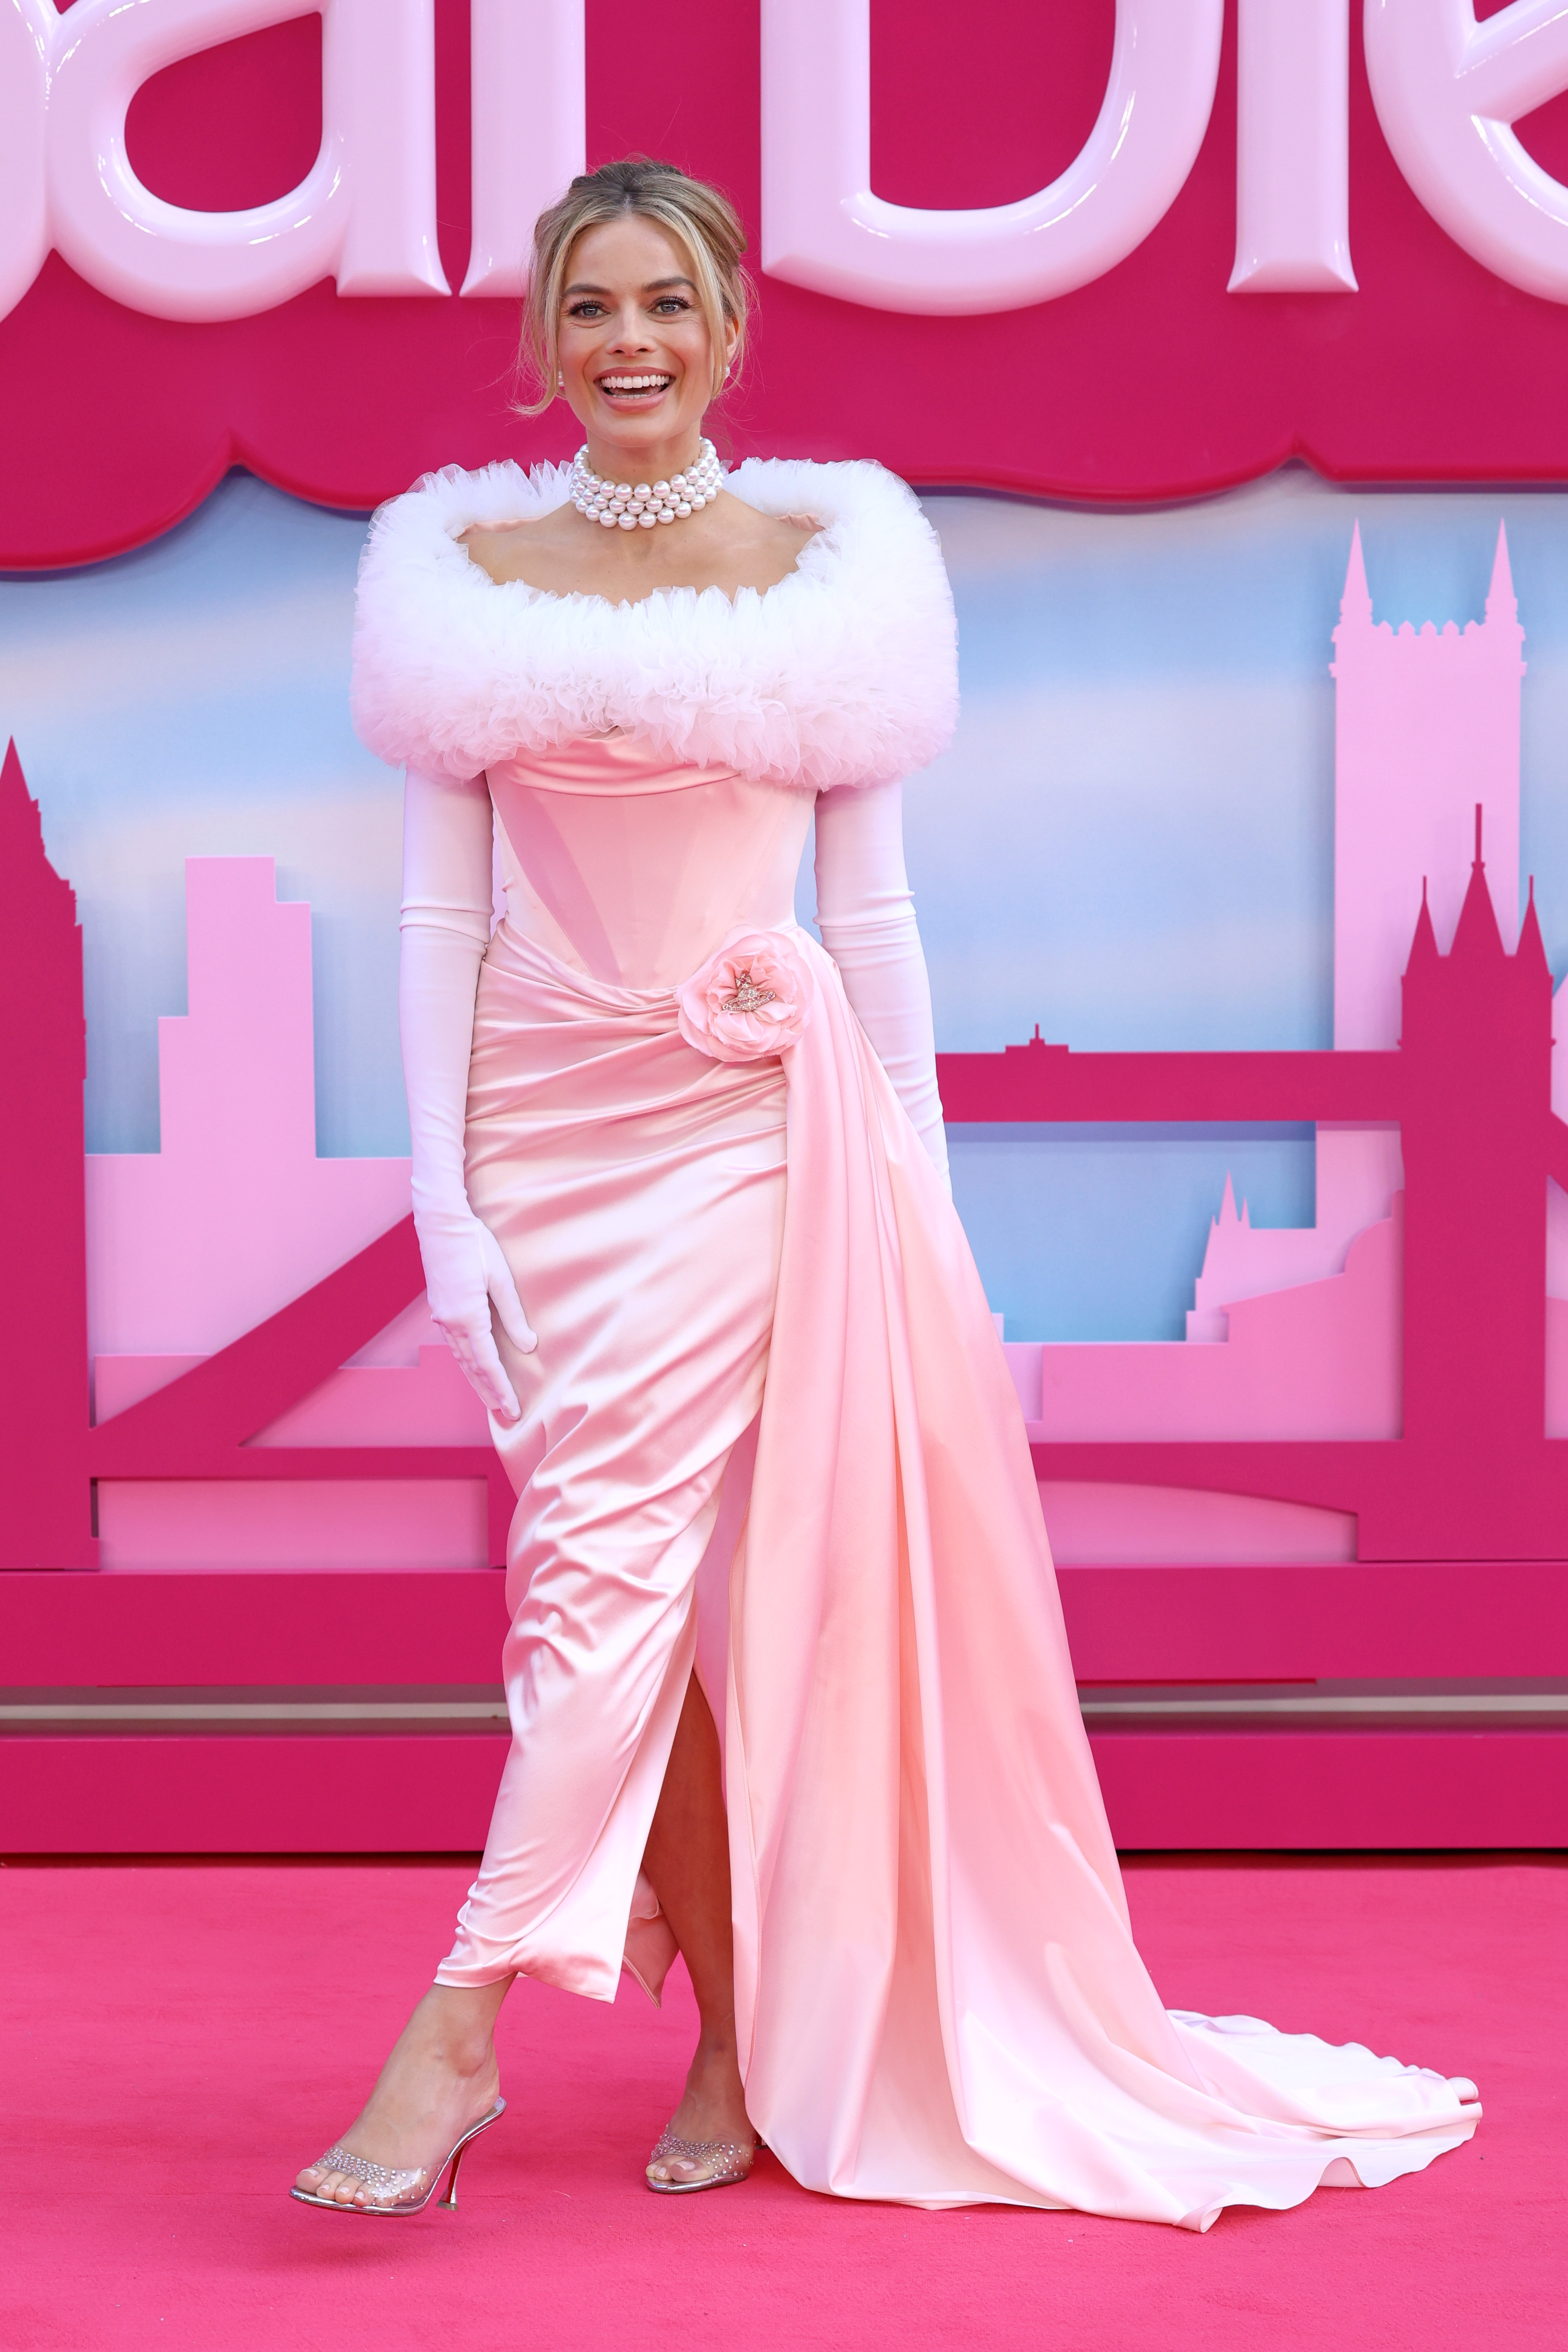 Margot smiles on the red carpet in a pink gown with a fluffy white trim around the shoulders